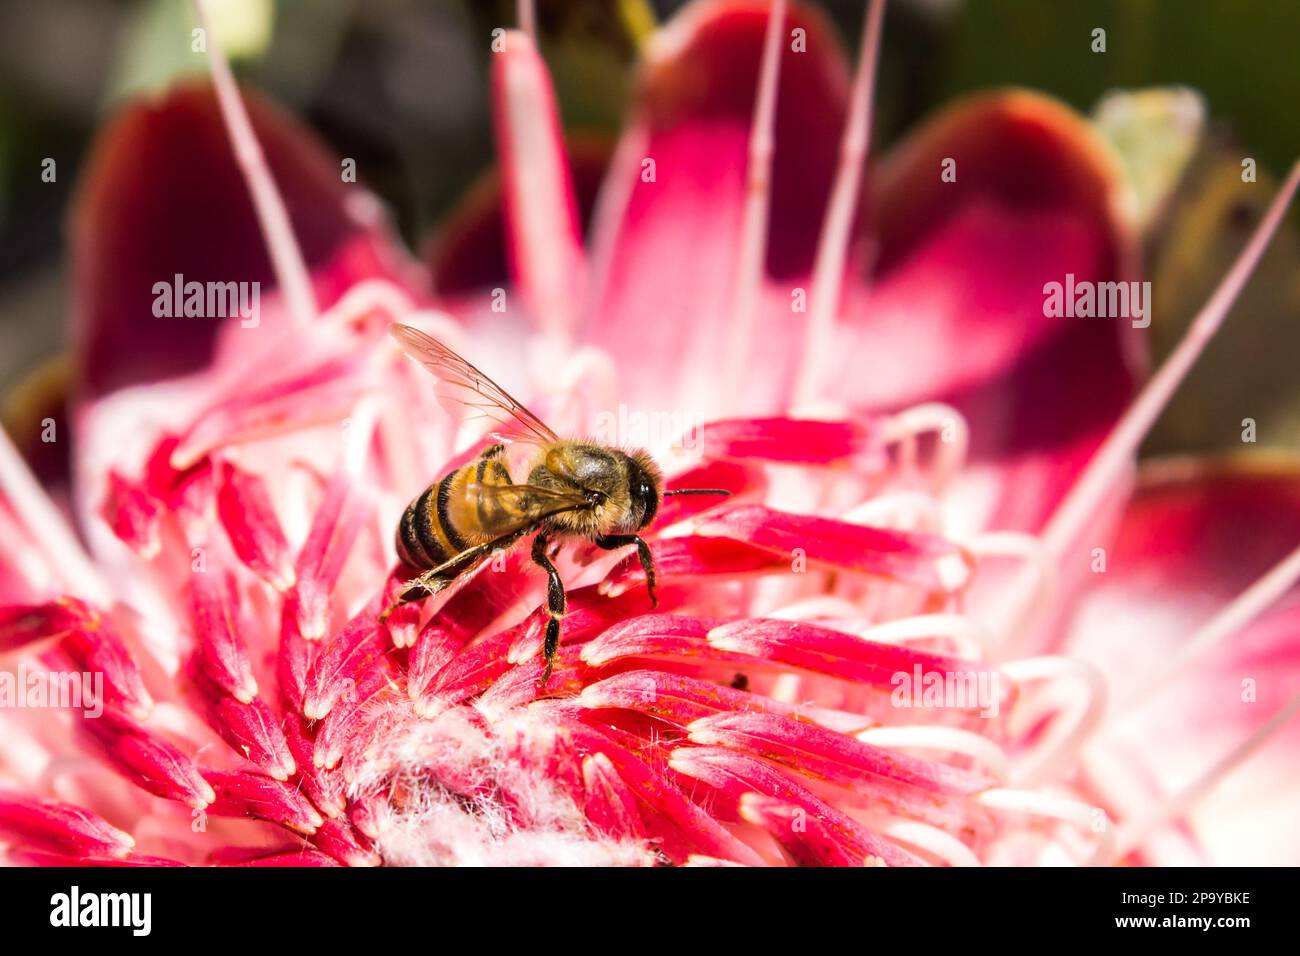 Close-up of a honey bee, foraging on a bright pink flower of a common sugar bush, in the Suburban park of Kloofendal in Roodepoort, South Africa Stock Photo